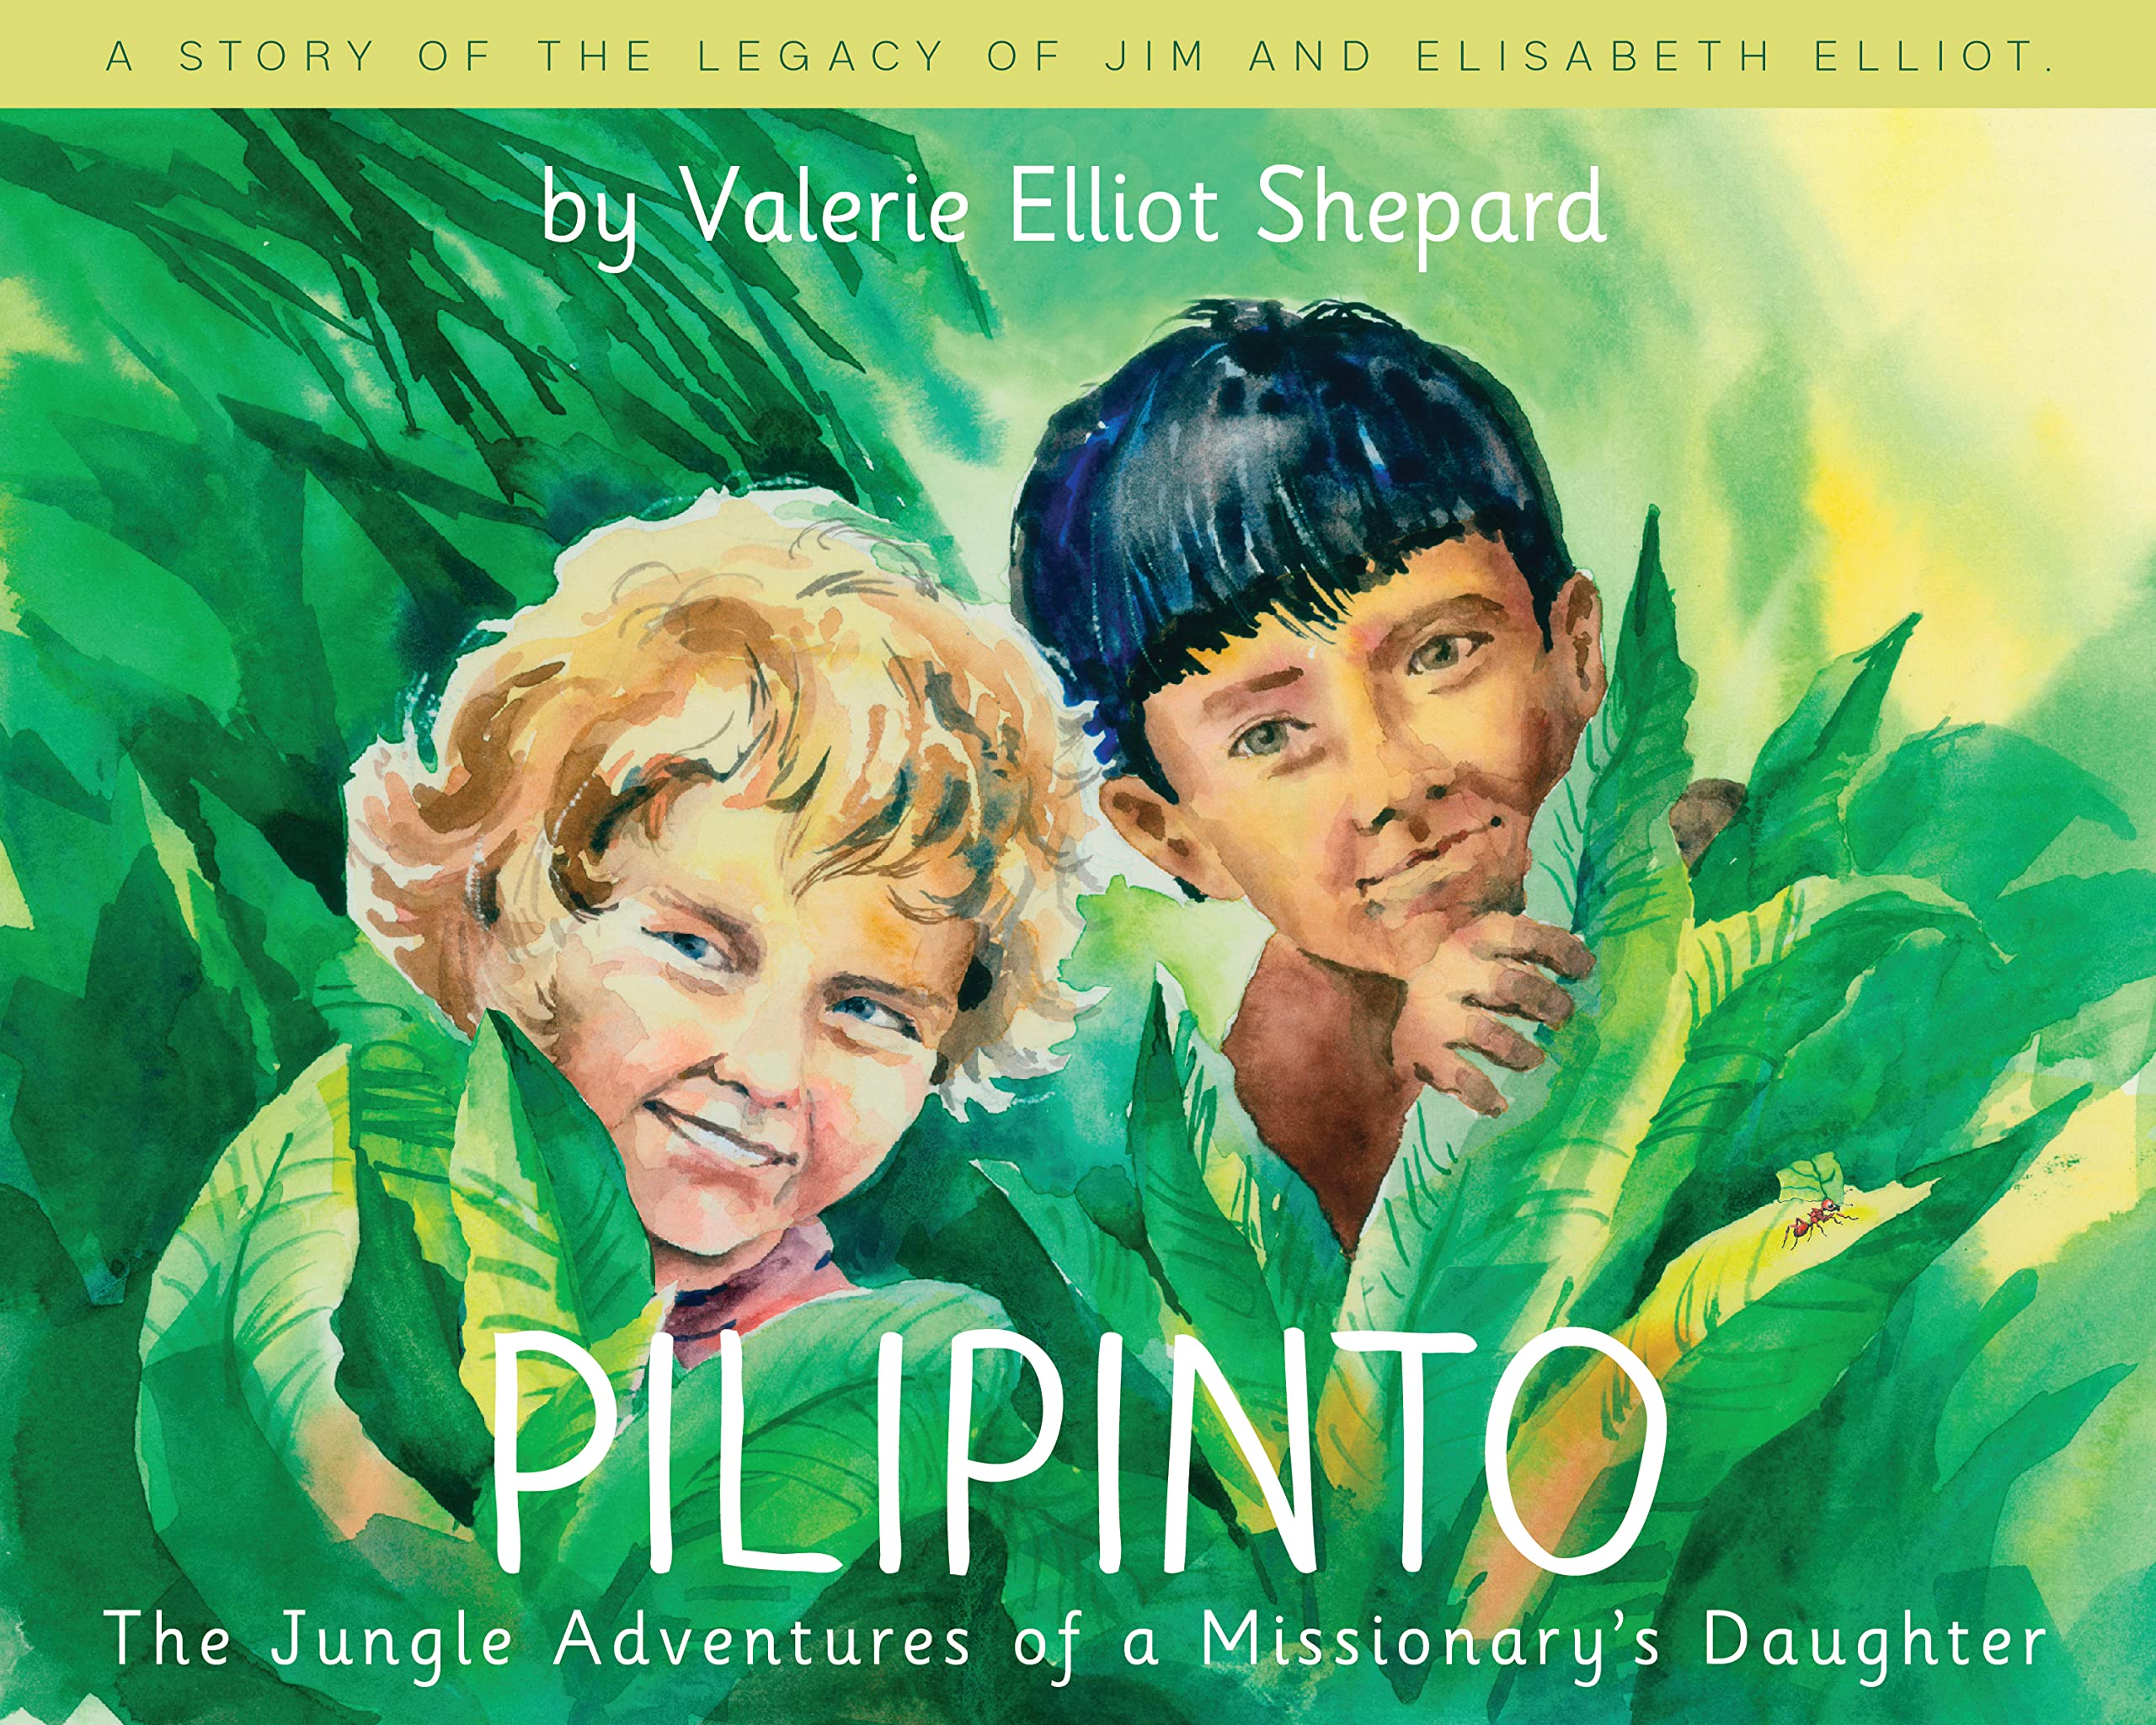 Pilipinto’s Happiness: The Jungle Adventures of a Missionary’s Daughter